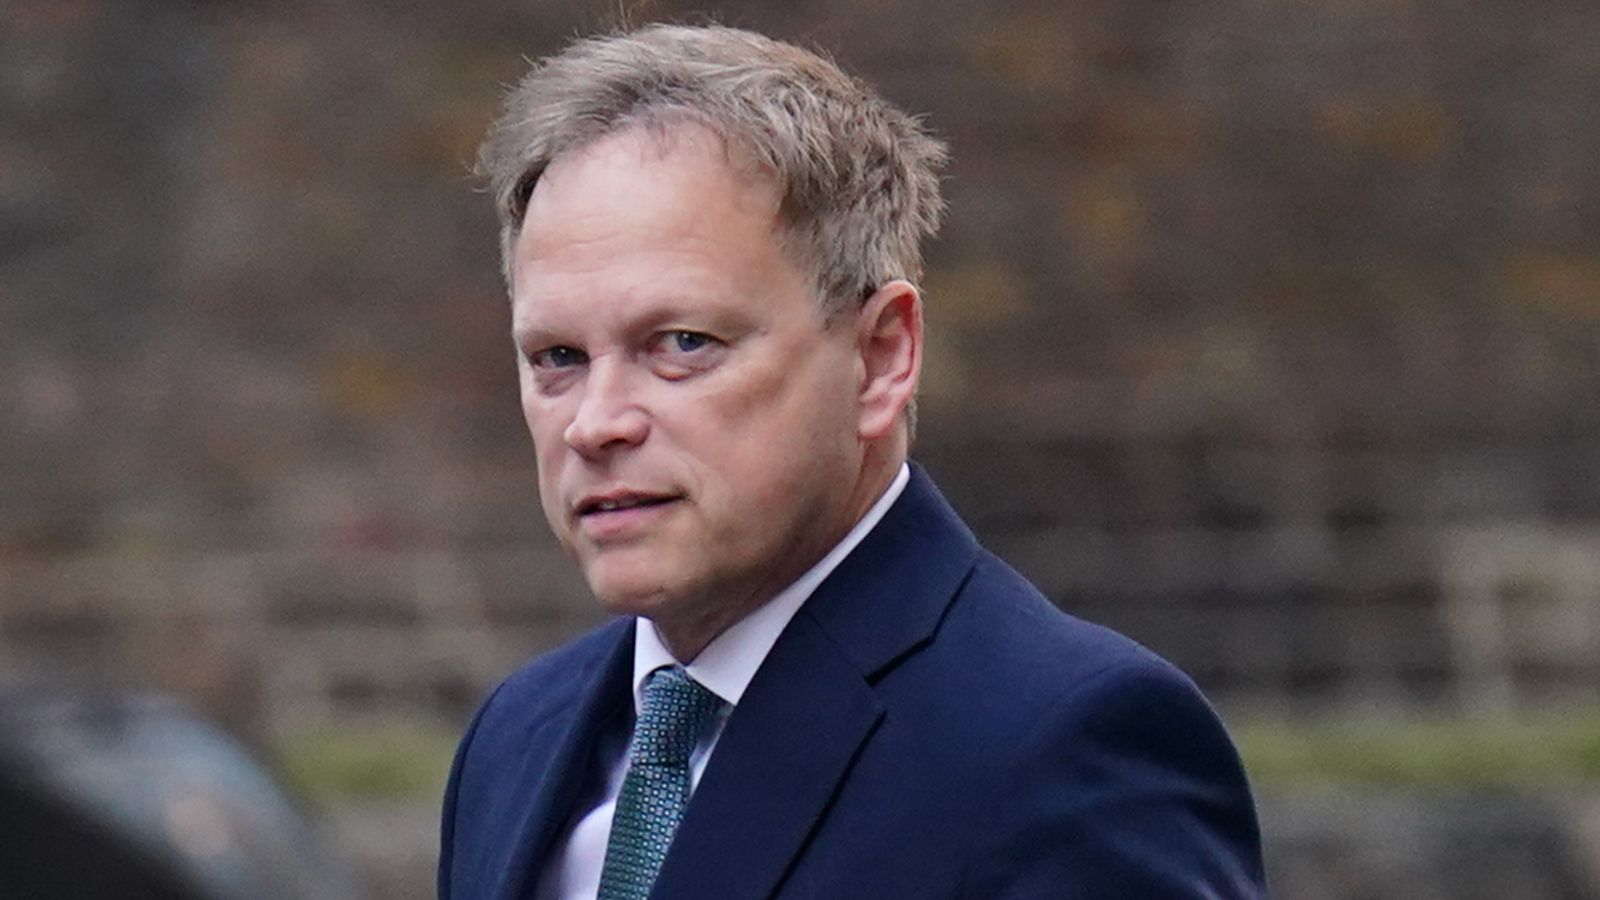 uk's intention 'not to go into yemen' but govt open to more strikes against houthis - shapps